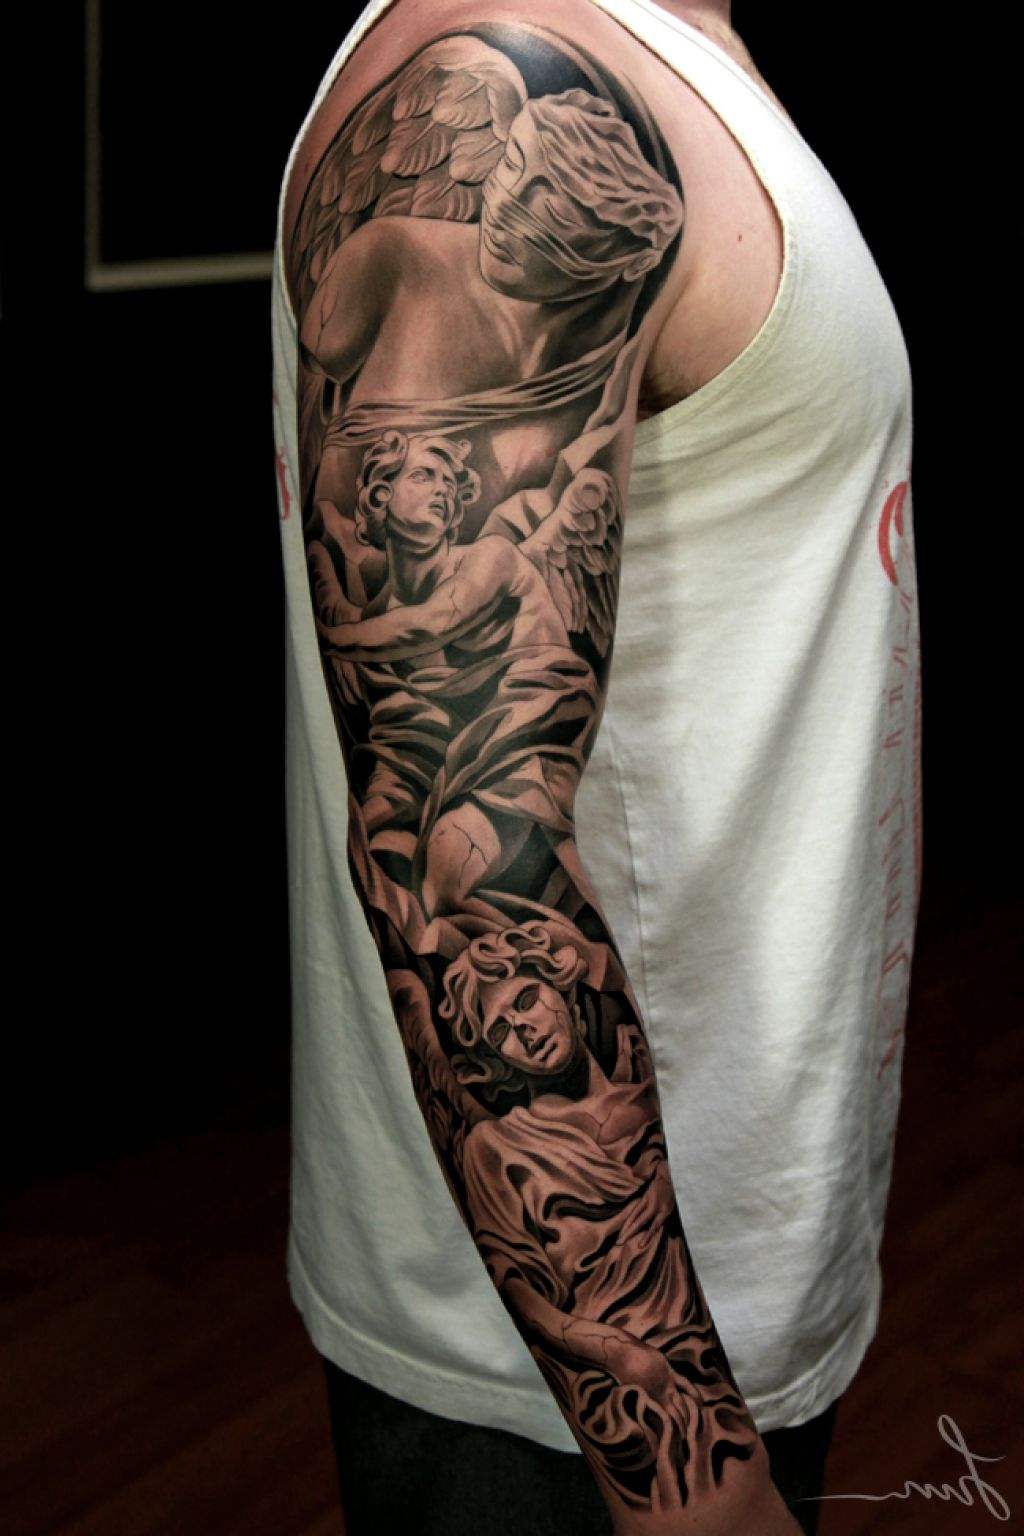 26 Angel Sleeve Tattoos Ideas with dimensions 1024 X 1536